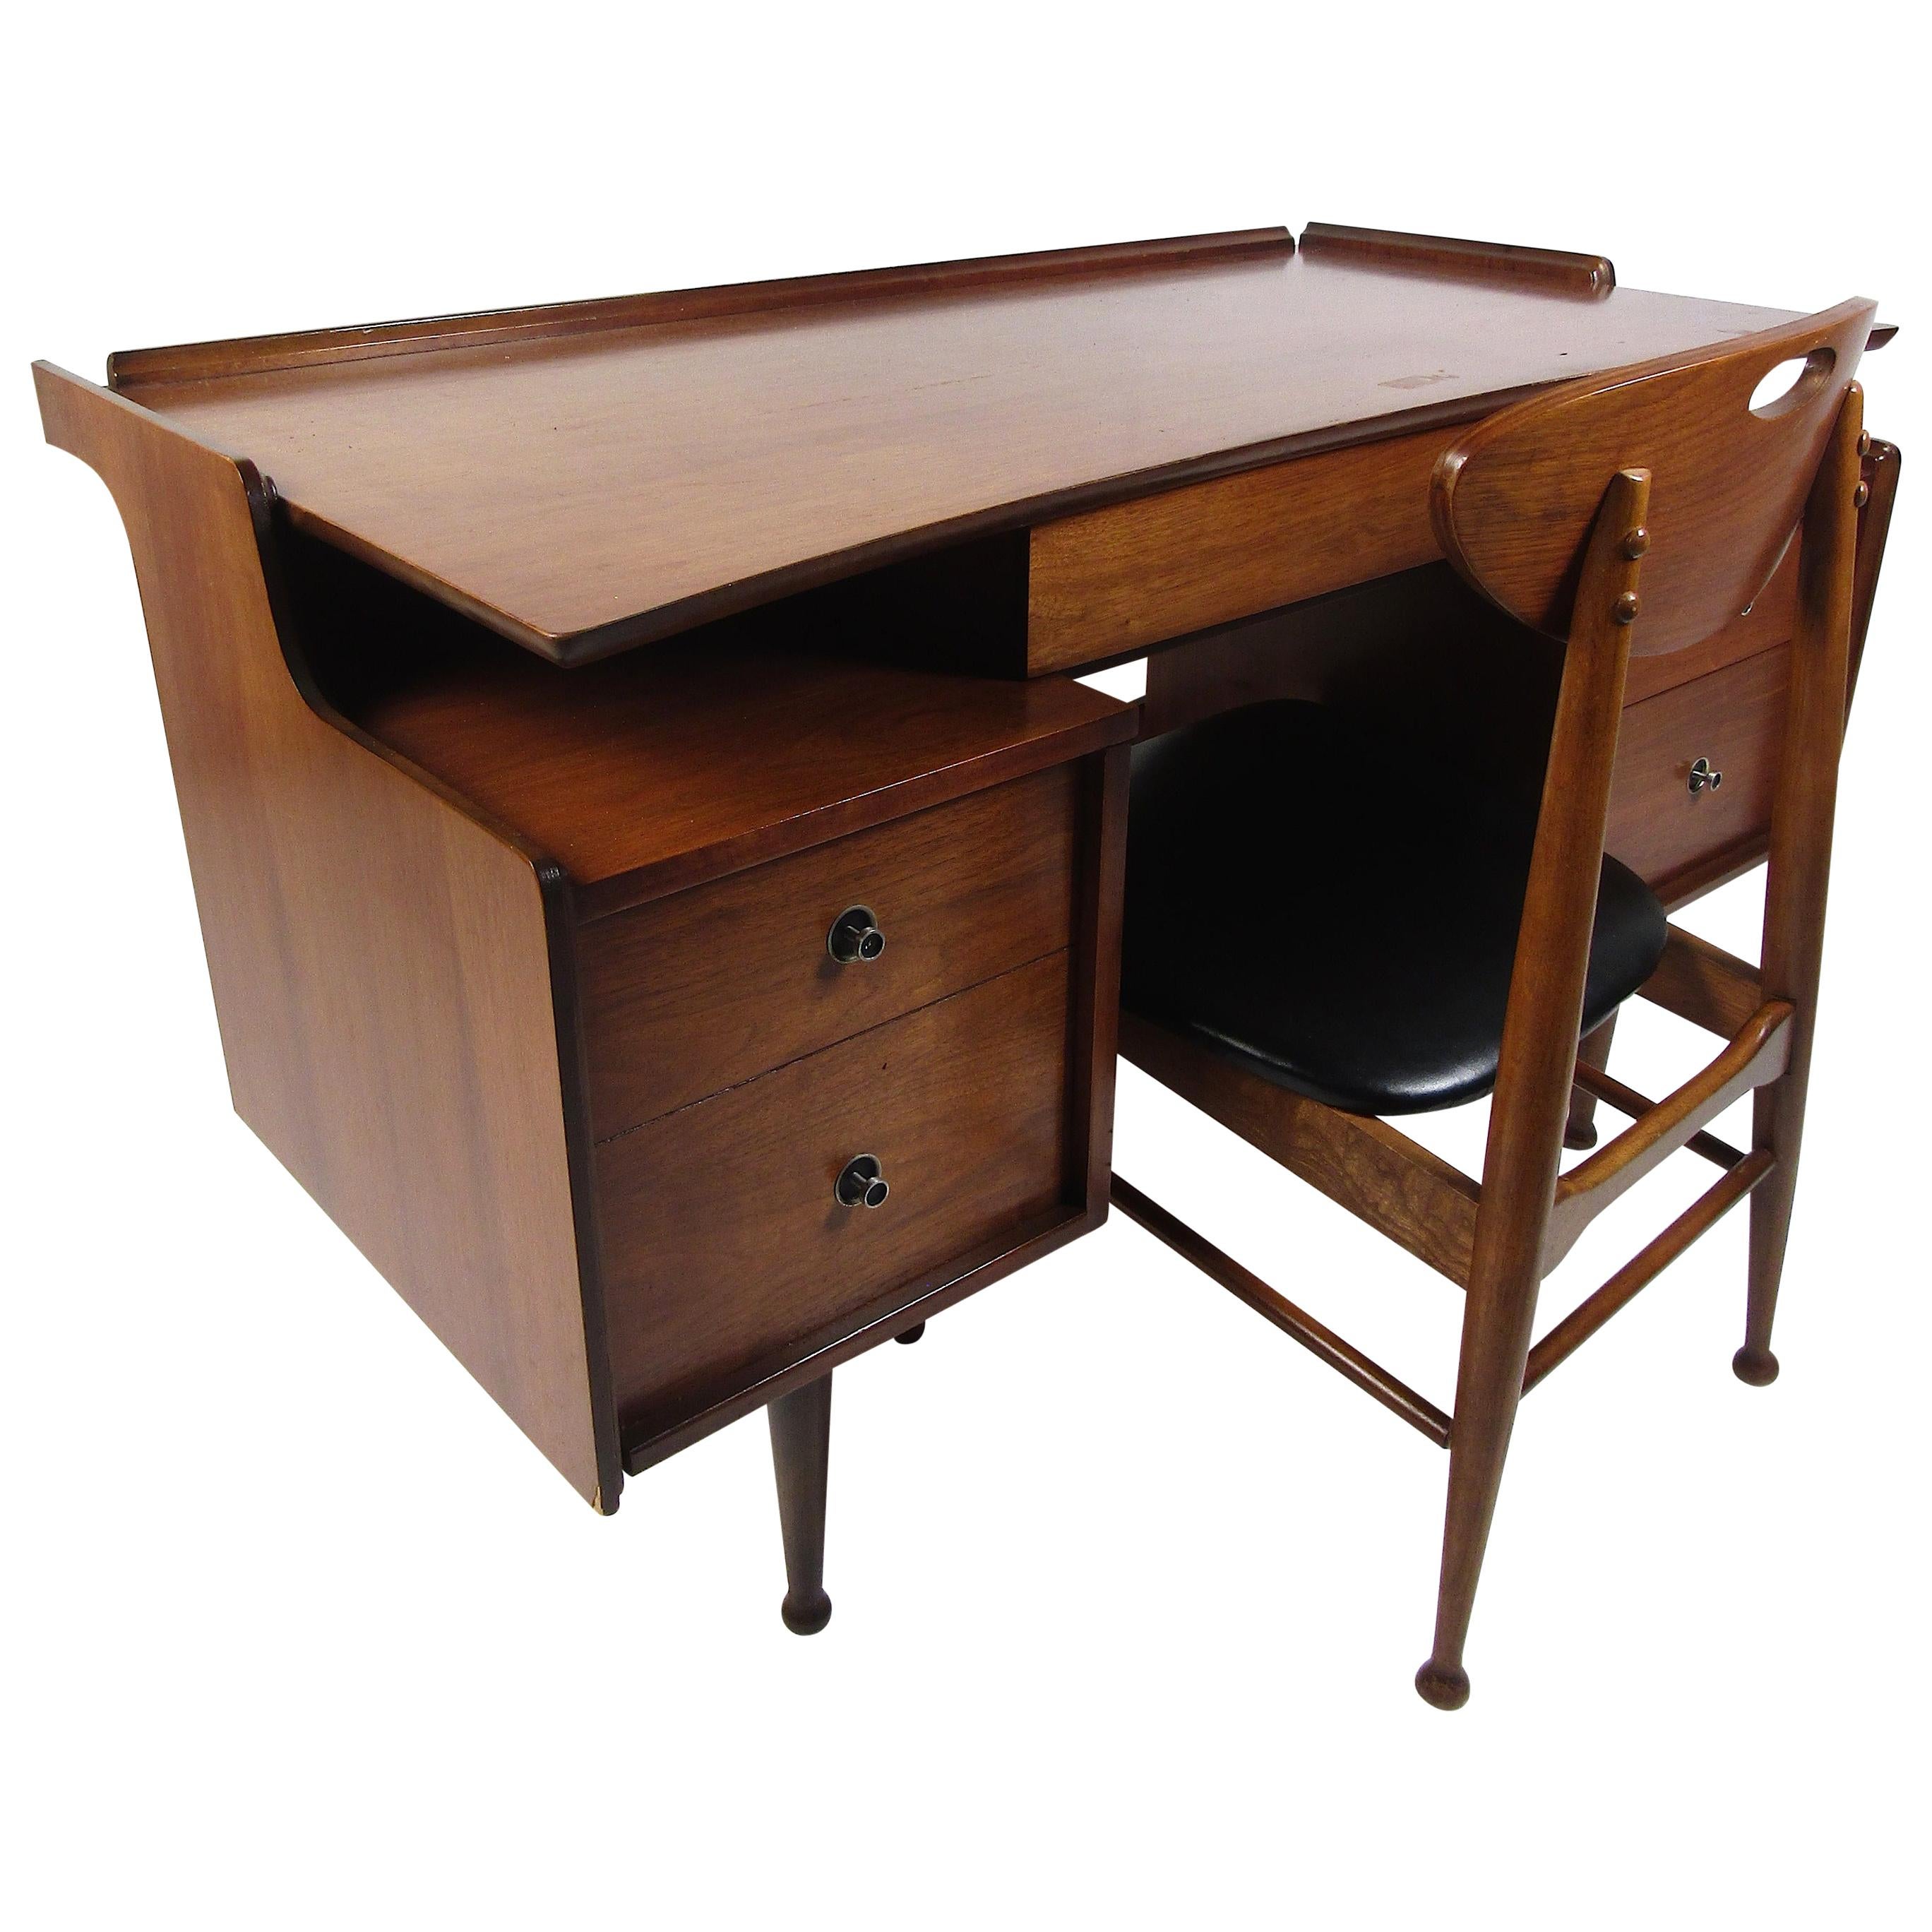 Midcentury Desk and Chair by Hooker Furniture